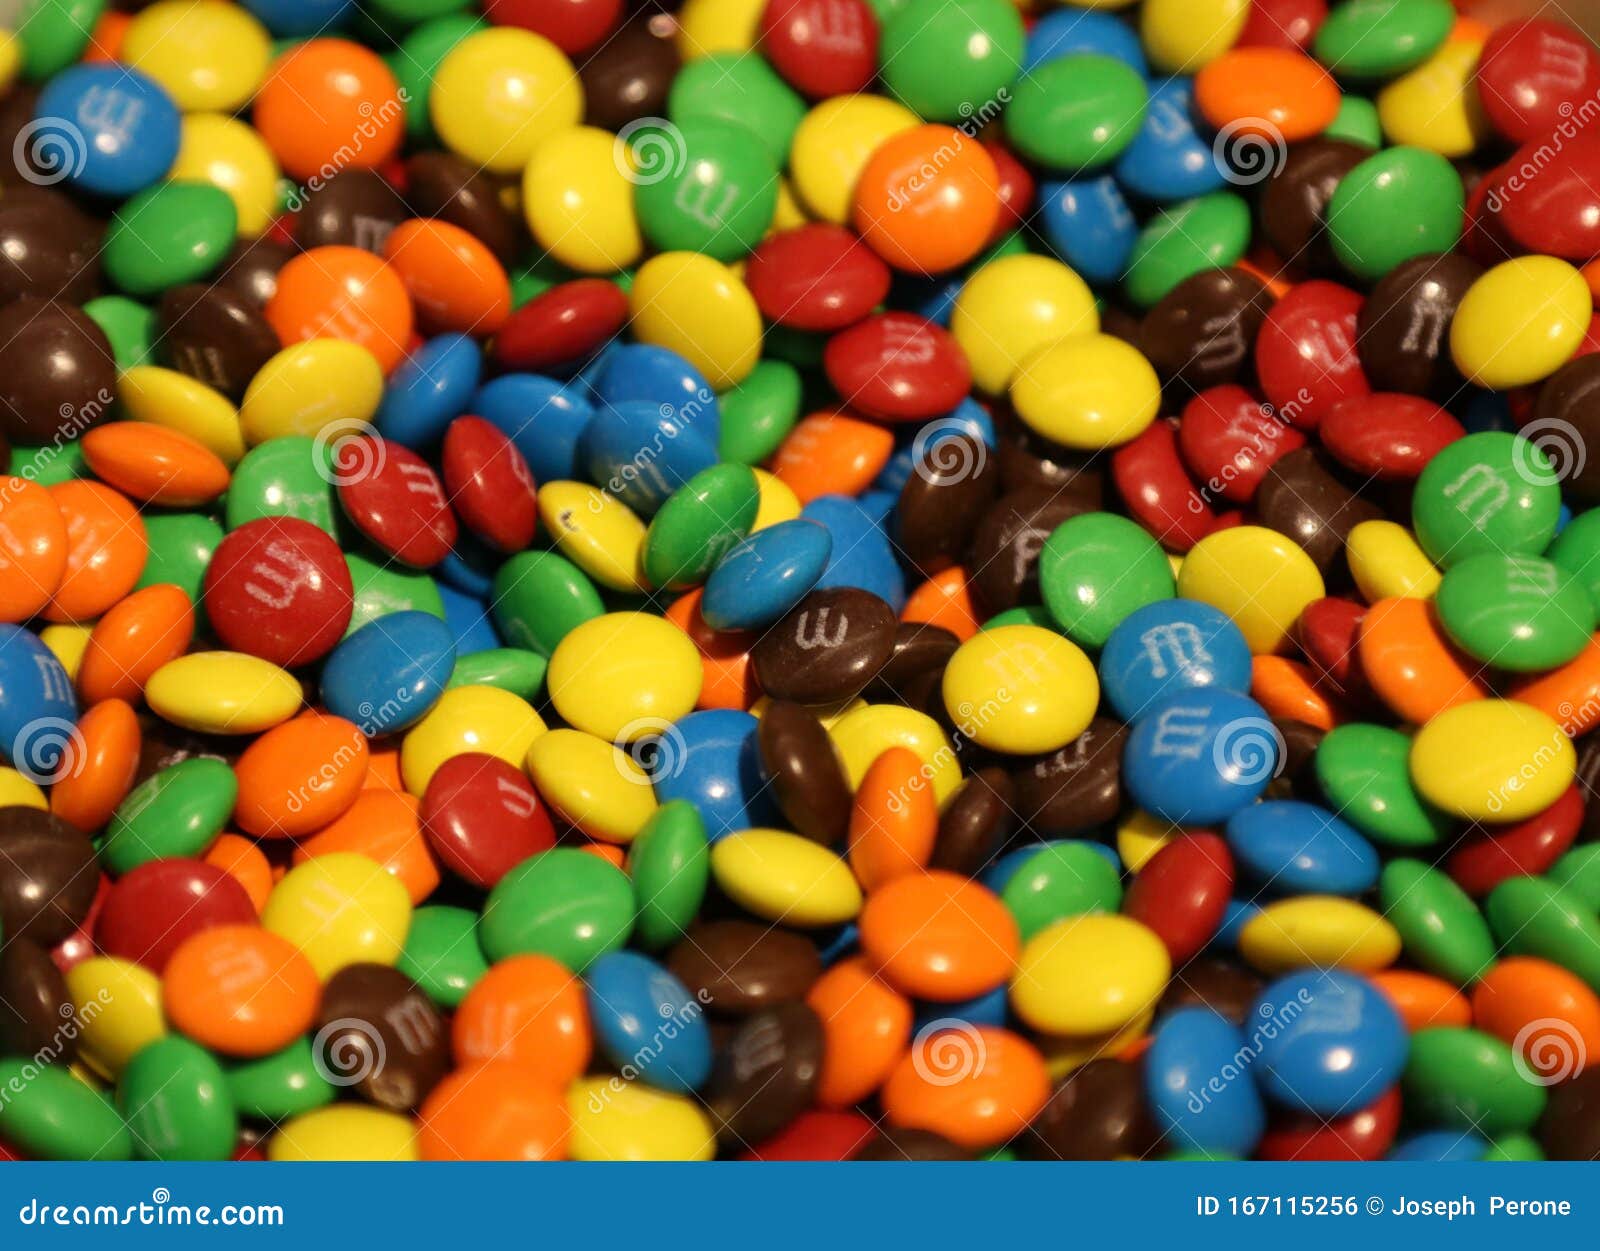 M &amp; M Candies, Colorful, Sweet Editorial Photo - Image of colors, group ...